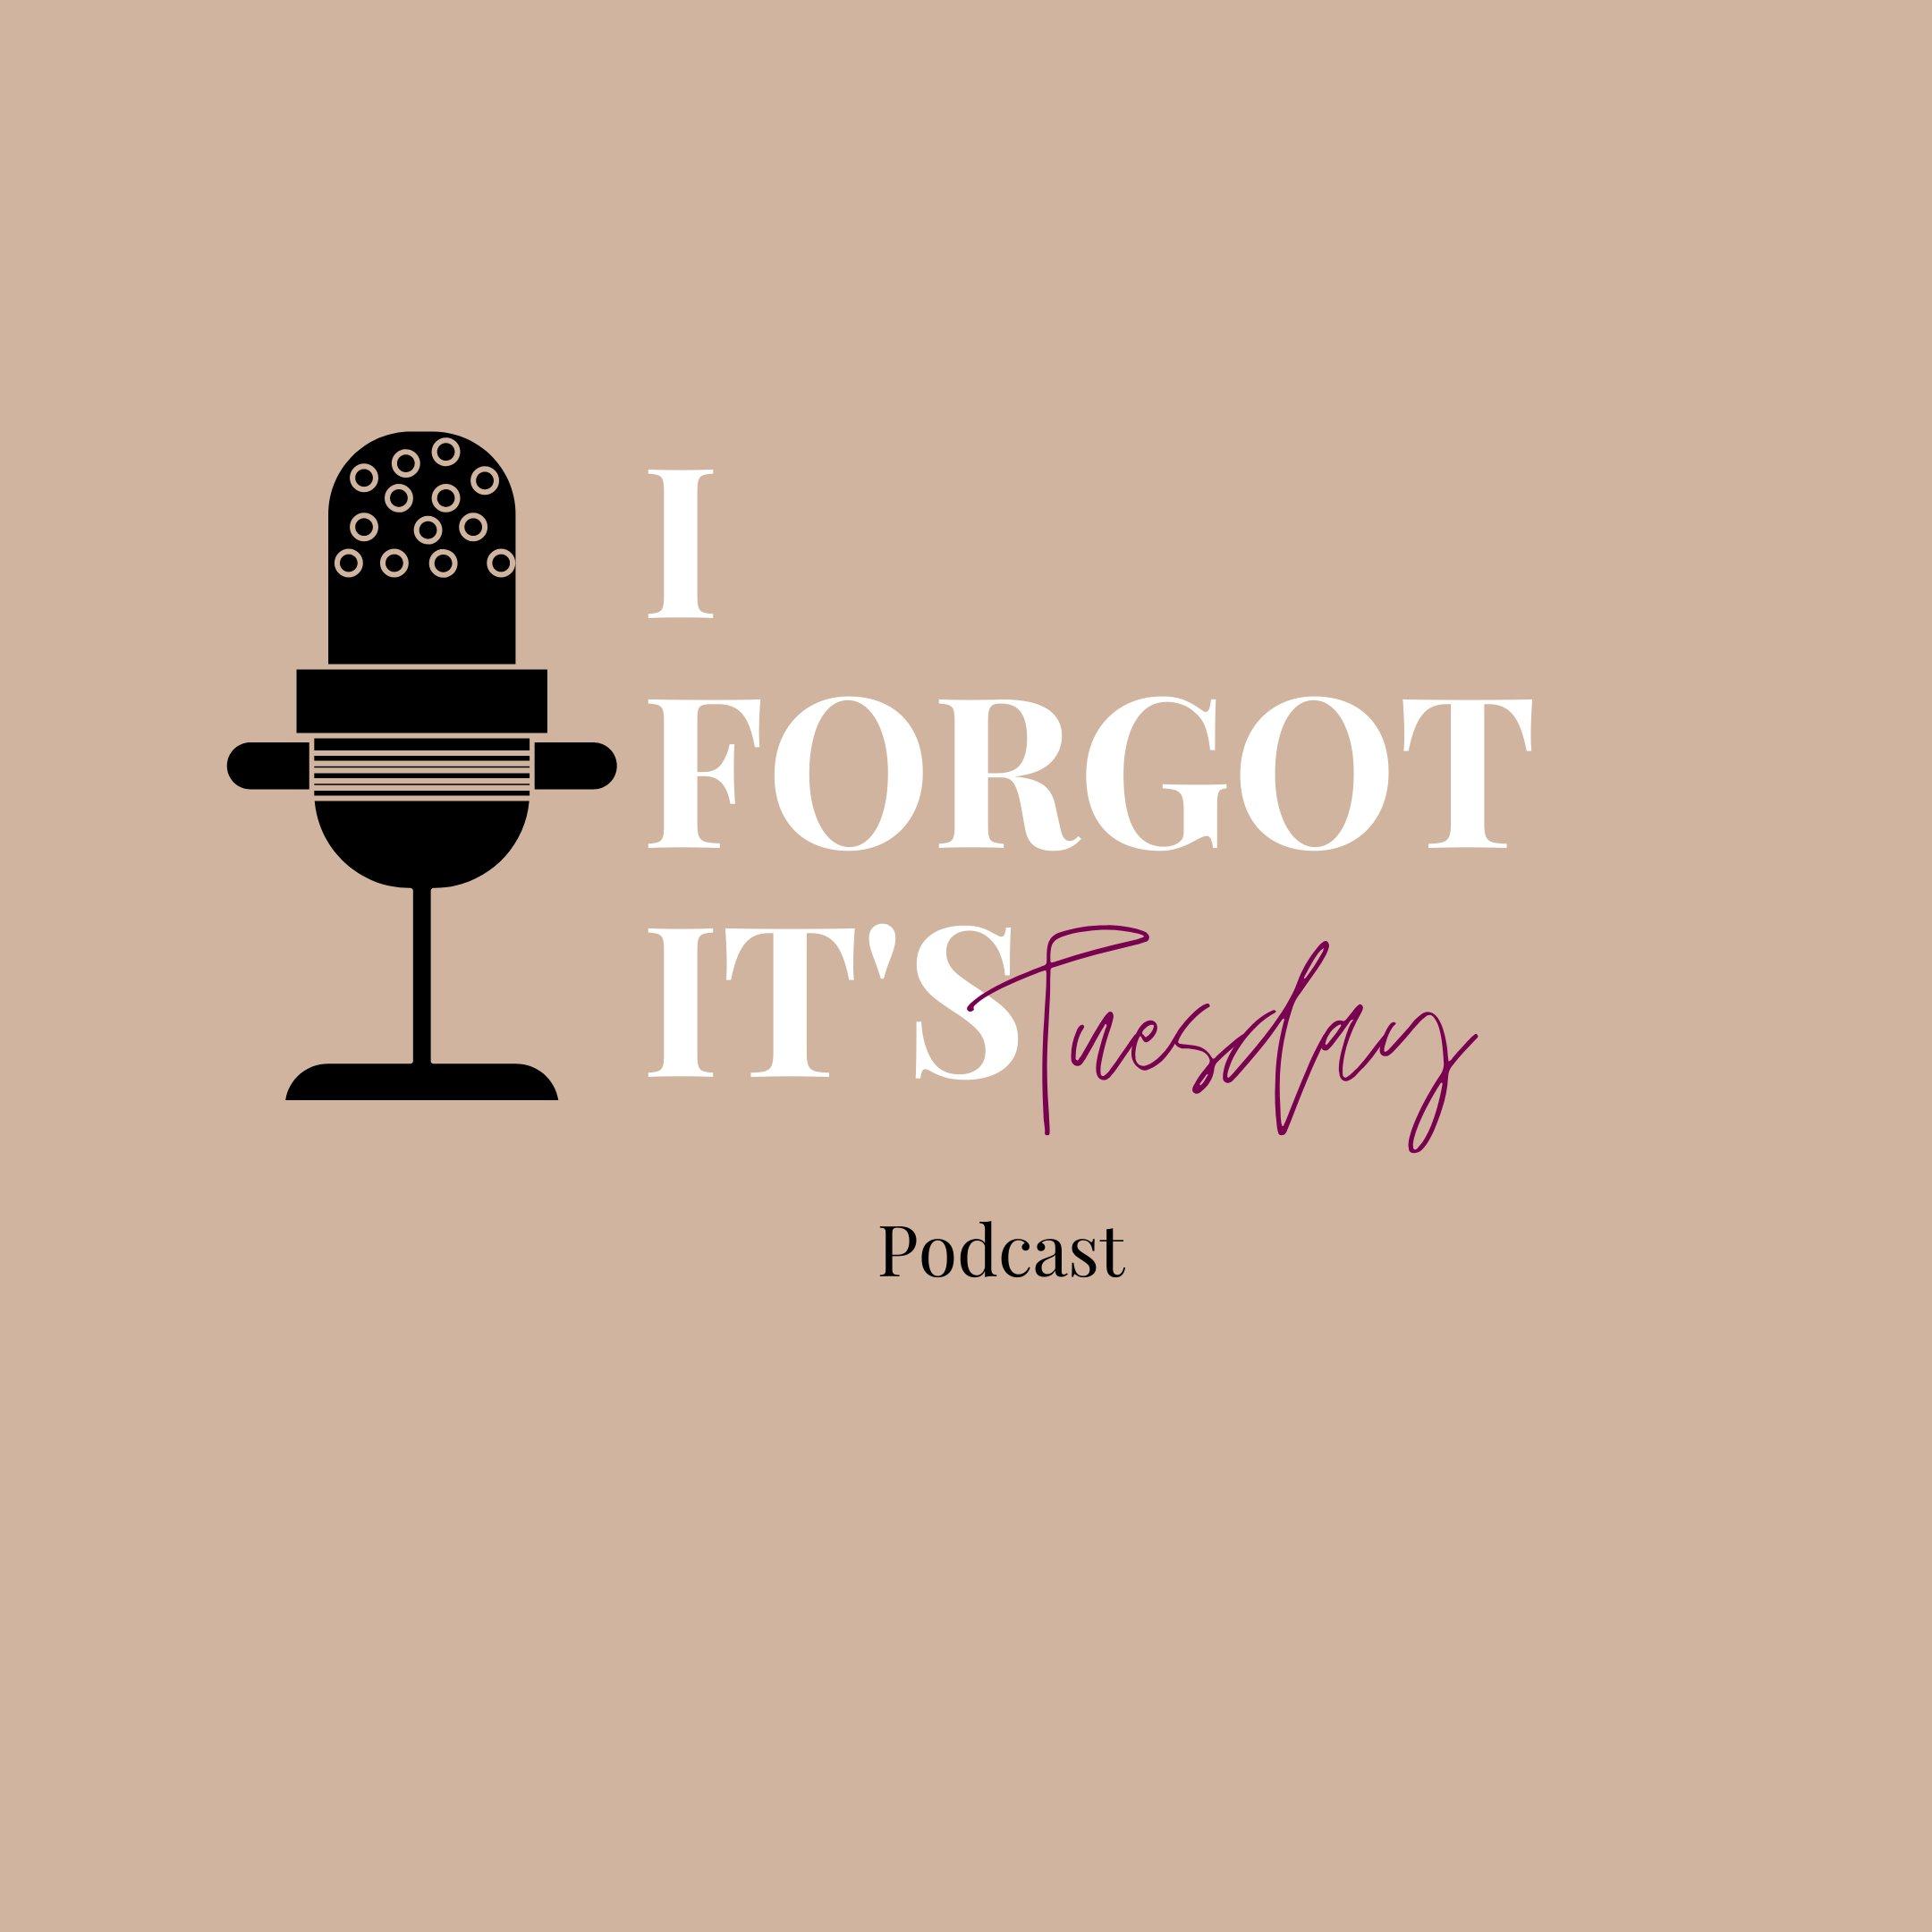 Welcome The "I Forgot It's Tuesday" Podcast